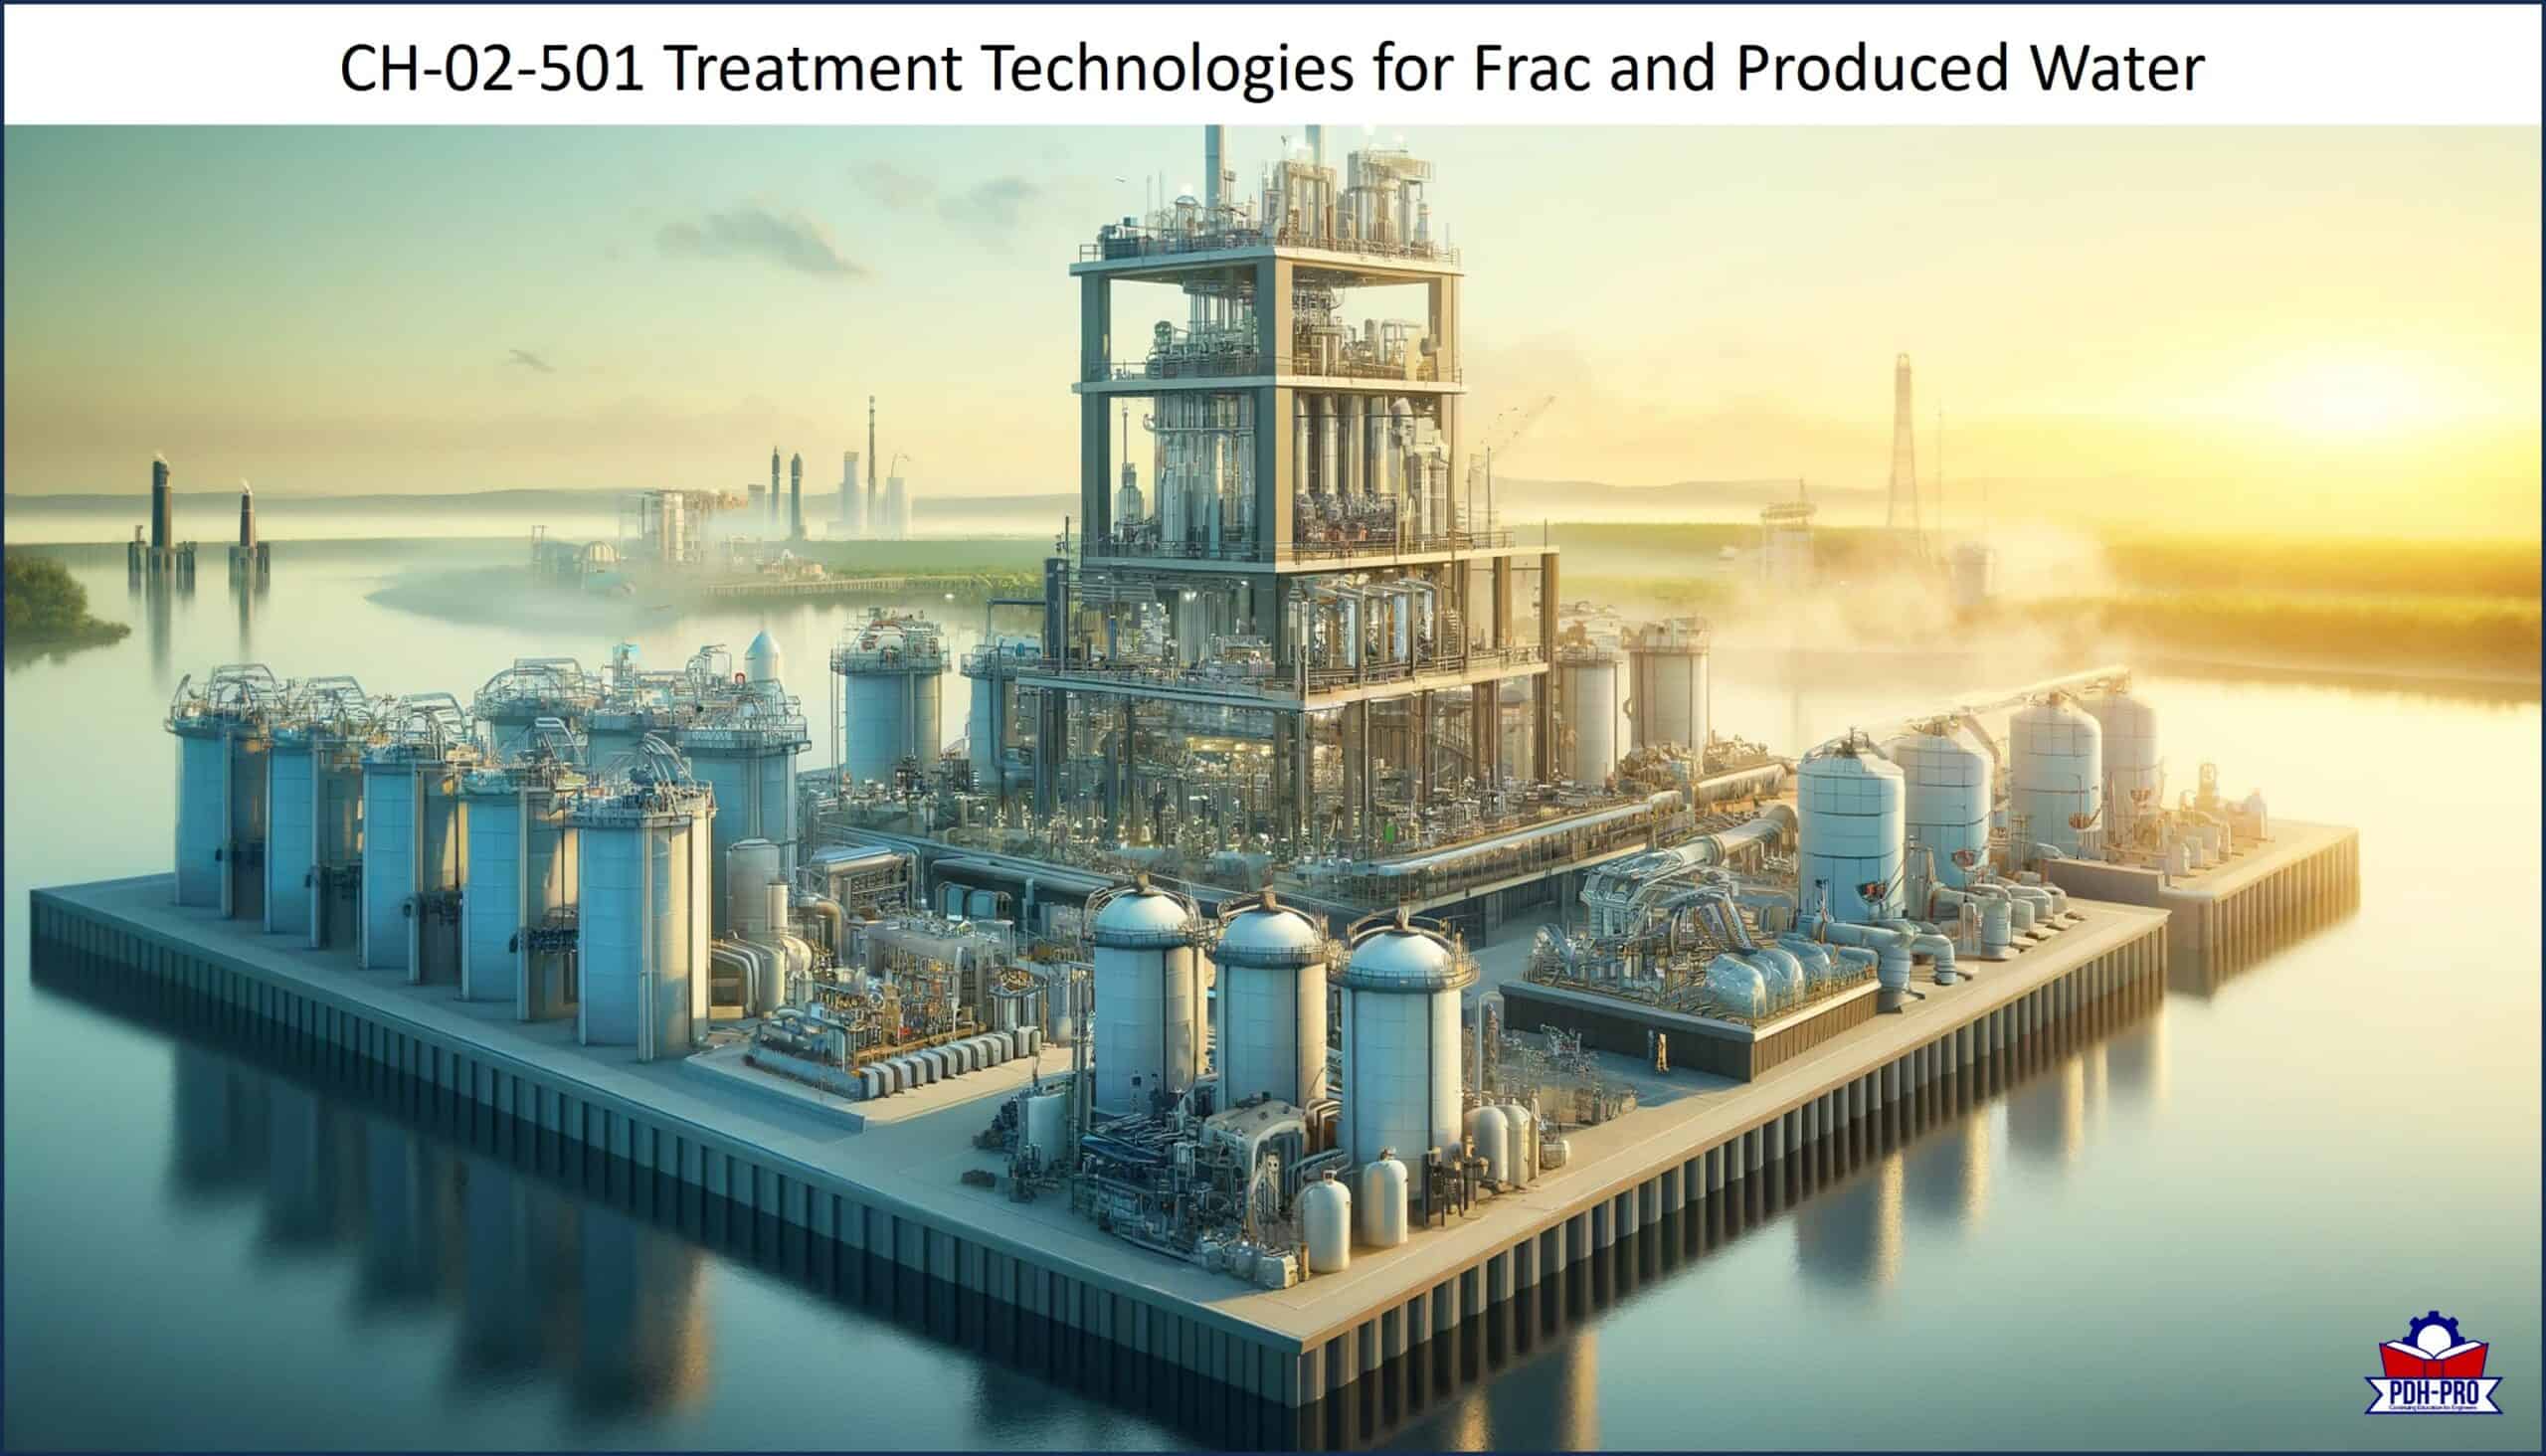 Treatment Technologies for Frac and Produced Water